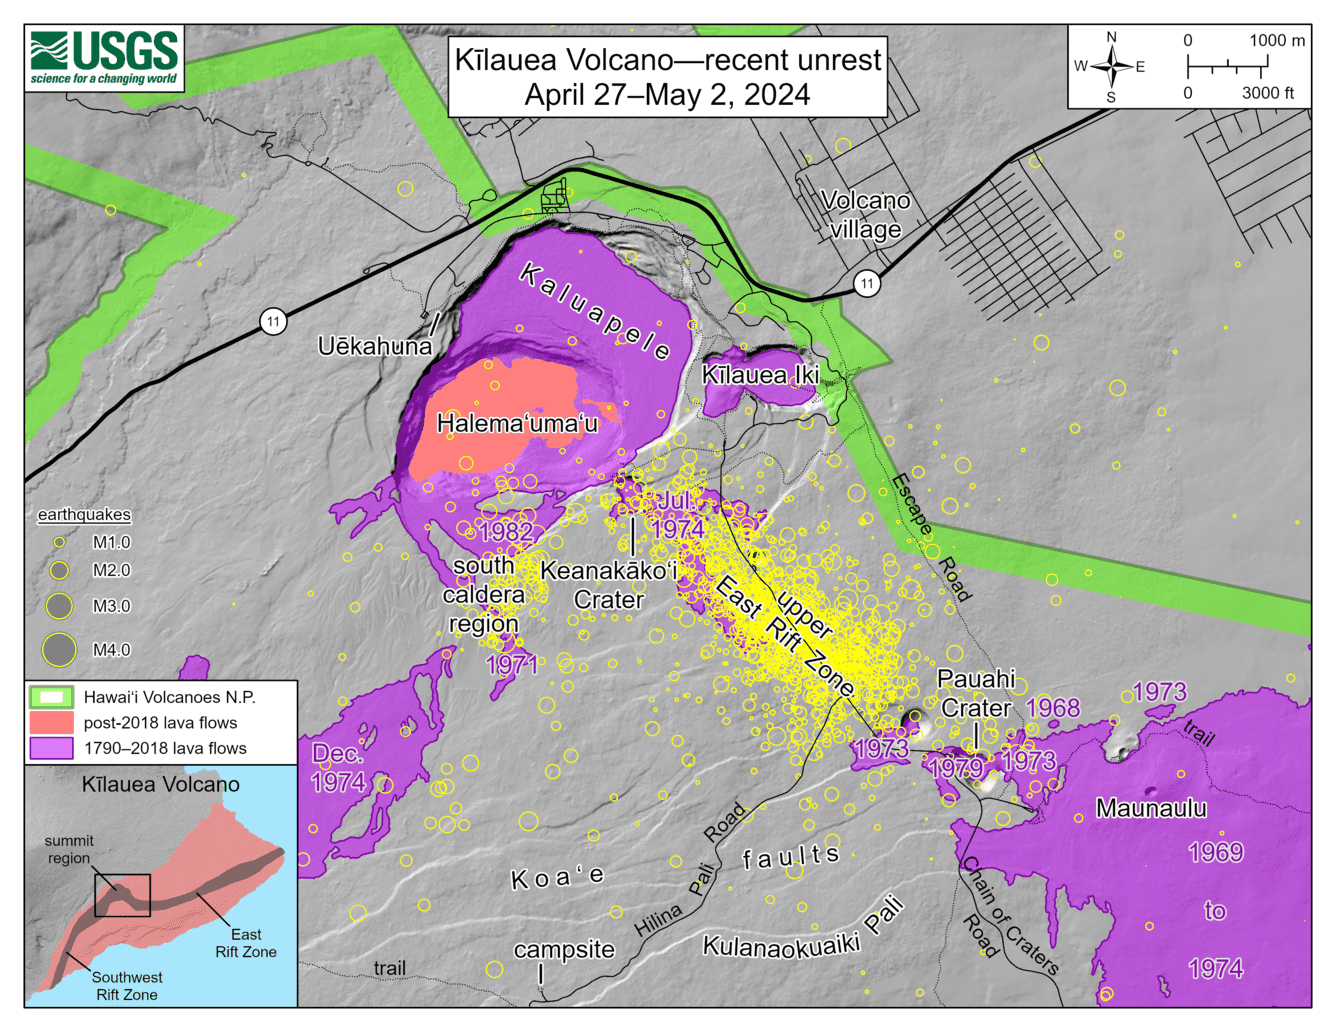 The distribution of earthquakes beneath the upper East Rift Zone along Chain of Craters Road between Puhimau Crater and Hilina Pali Road and even beneath the southern caldera region (Luamanu Crater and Keanakākoʻi Crater, and southeastward to Pauahi Crater) during 27 April and 2 May (image: HVO)